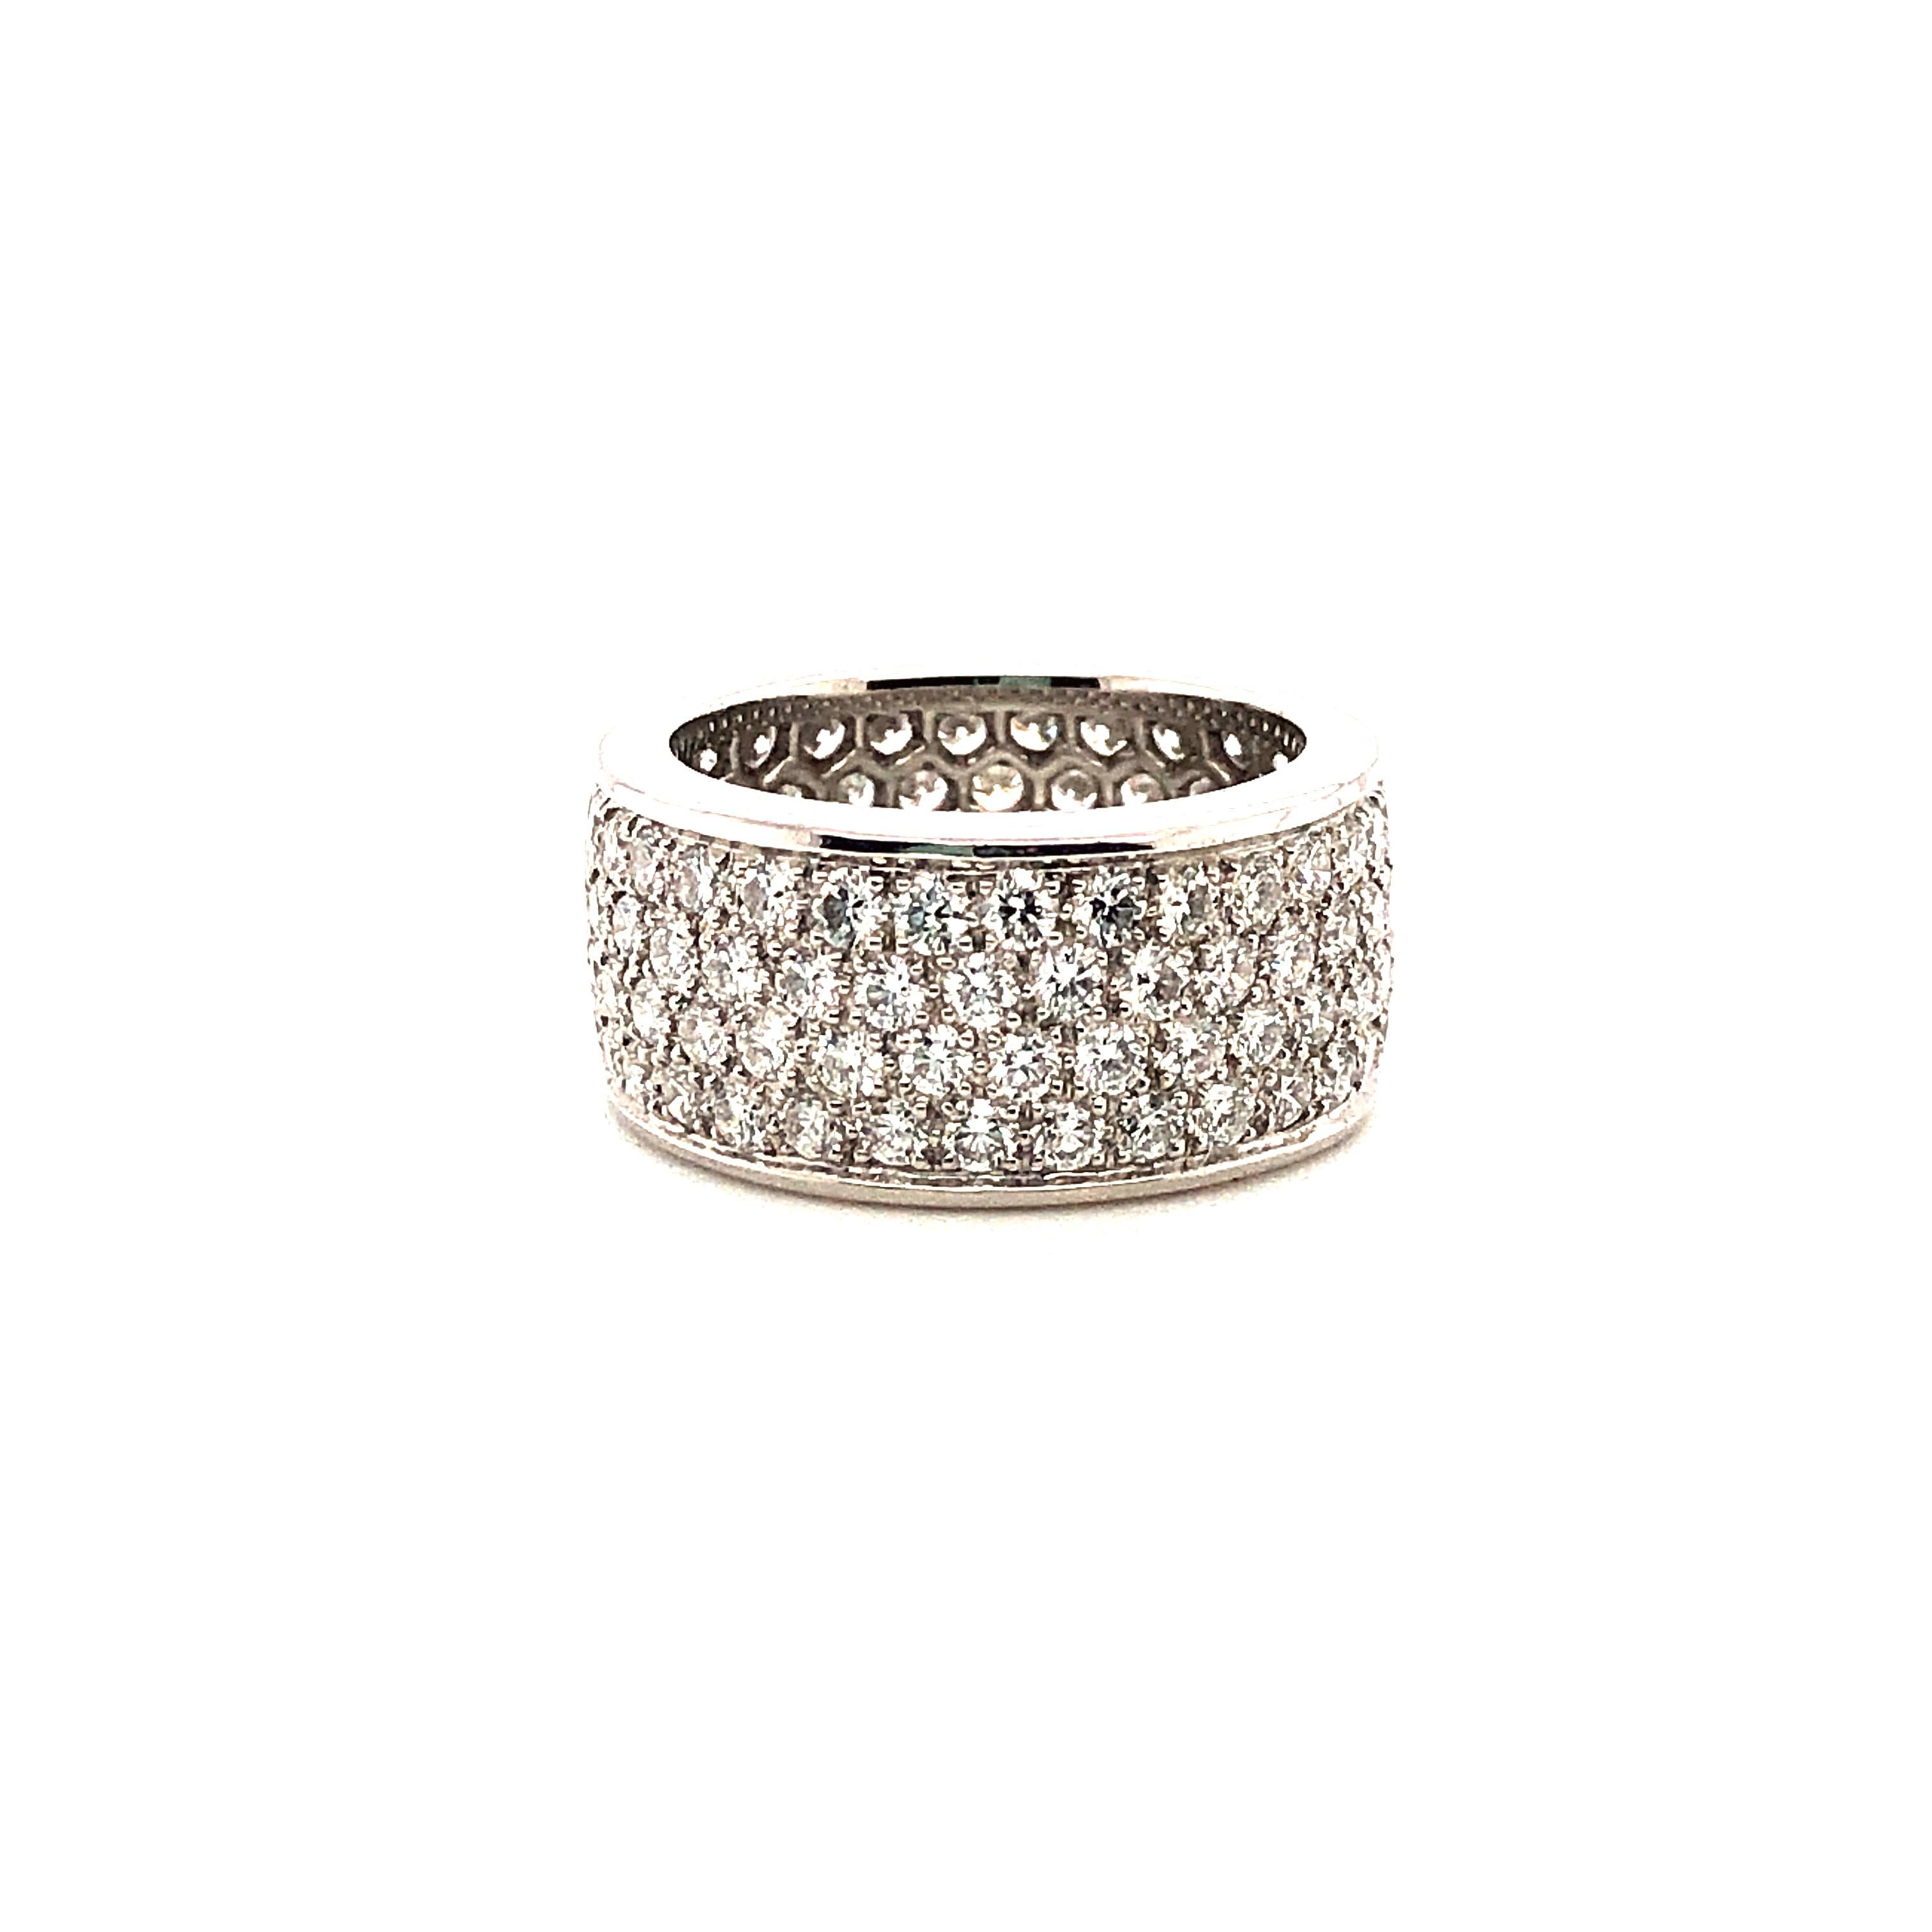 Oscar Heyman platinum band ring contains 120 round diamonds (3.97cts, F-G/VS) and is 10mm wide. It is stamped with the makers mark, IRID PLAT, and serial number W4907.

Size 6.5. Price will vary by size - inquire for specifics.

Custom hand